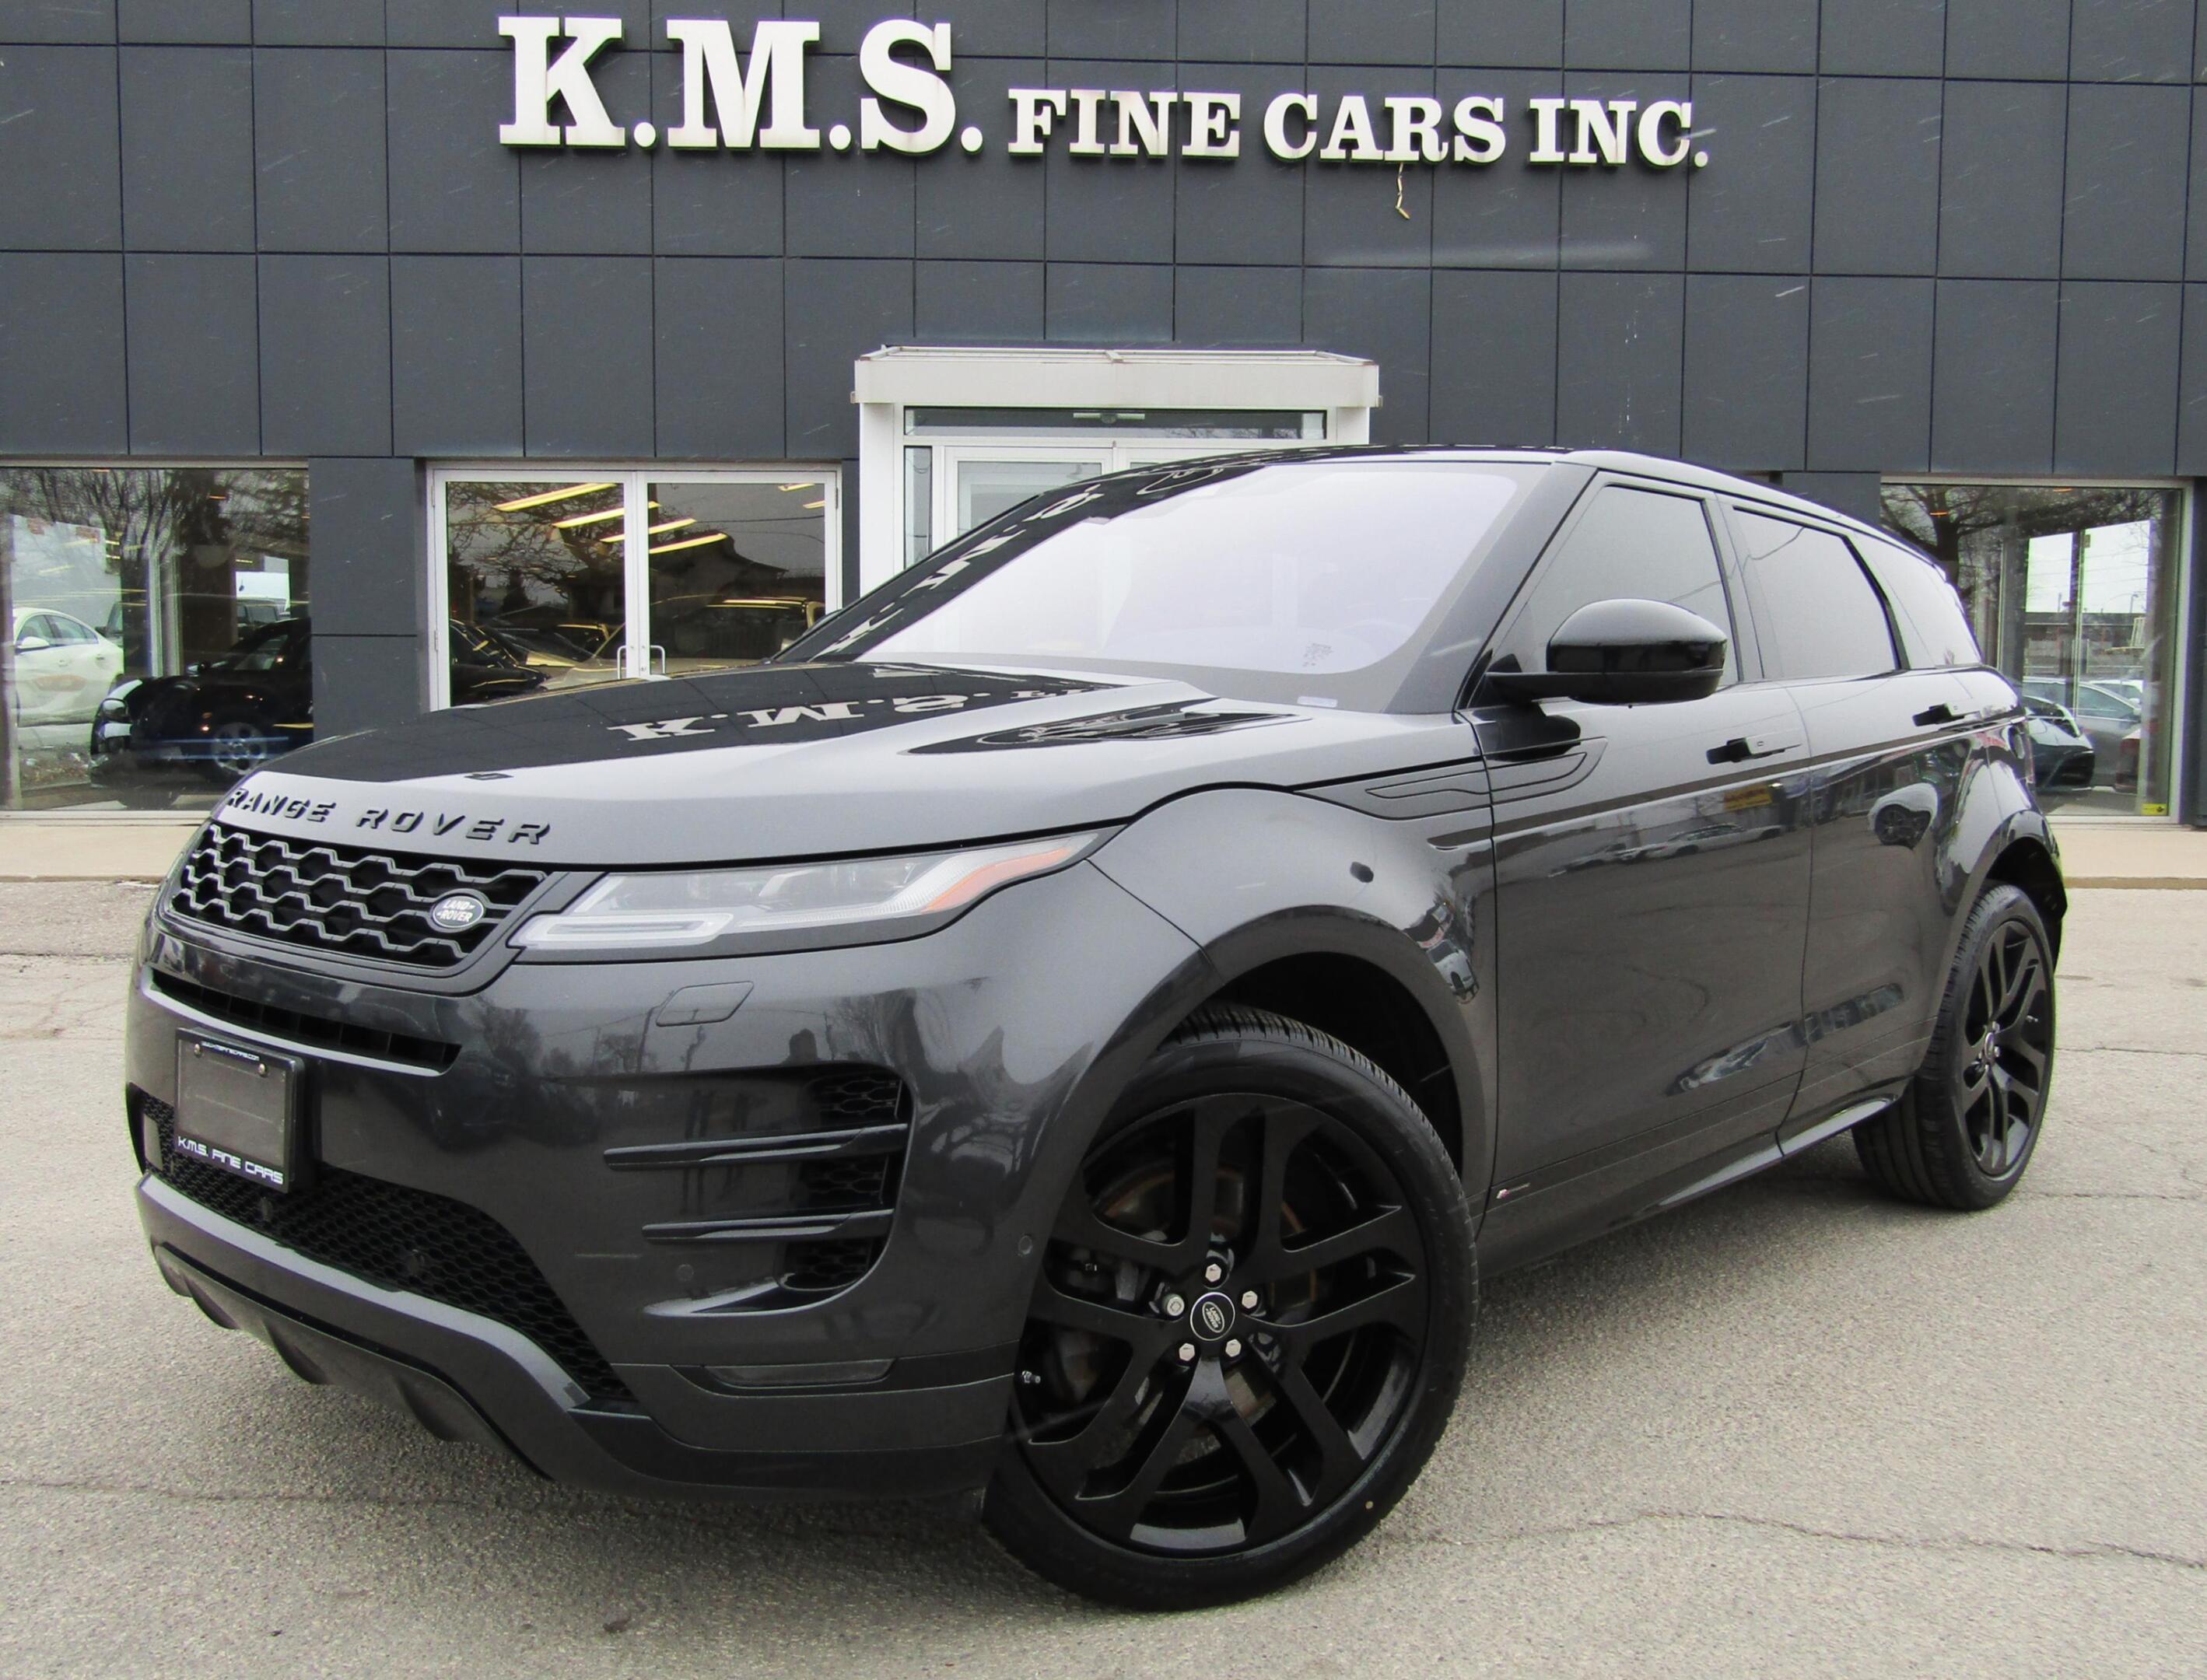 2020 Land Rover Range Rover Evoque P300 R-Dynamic HSE/ BLACK PACK/ MERIDIAN SOUND SYS